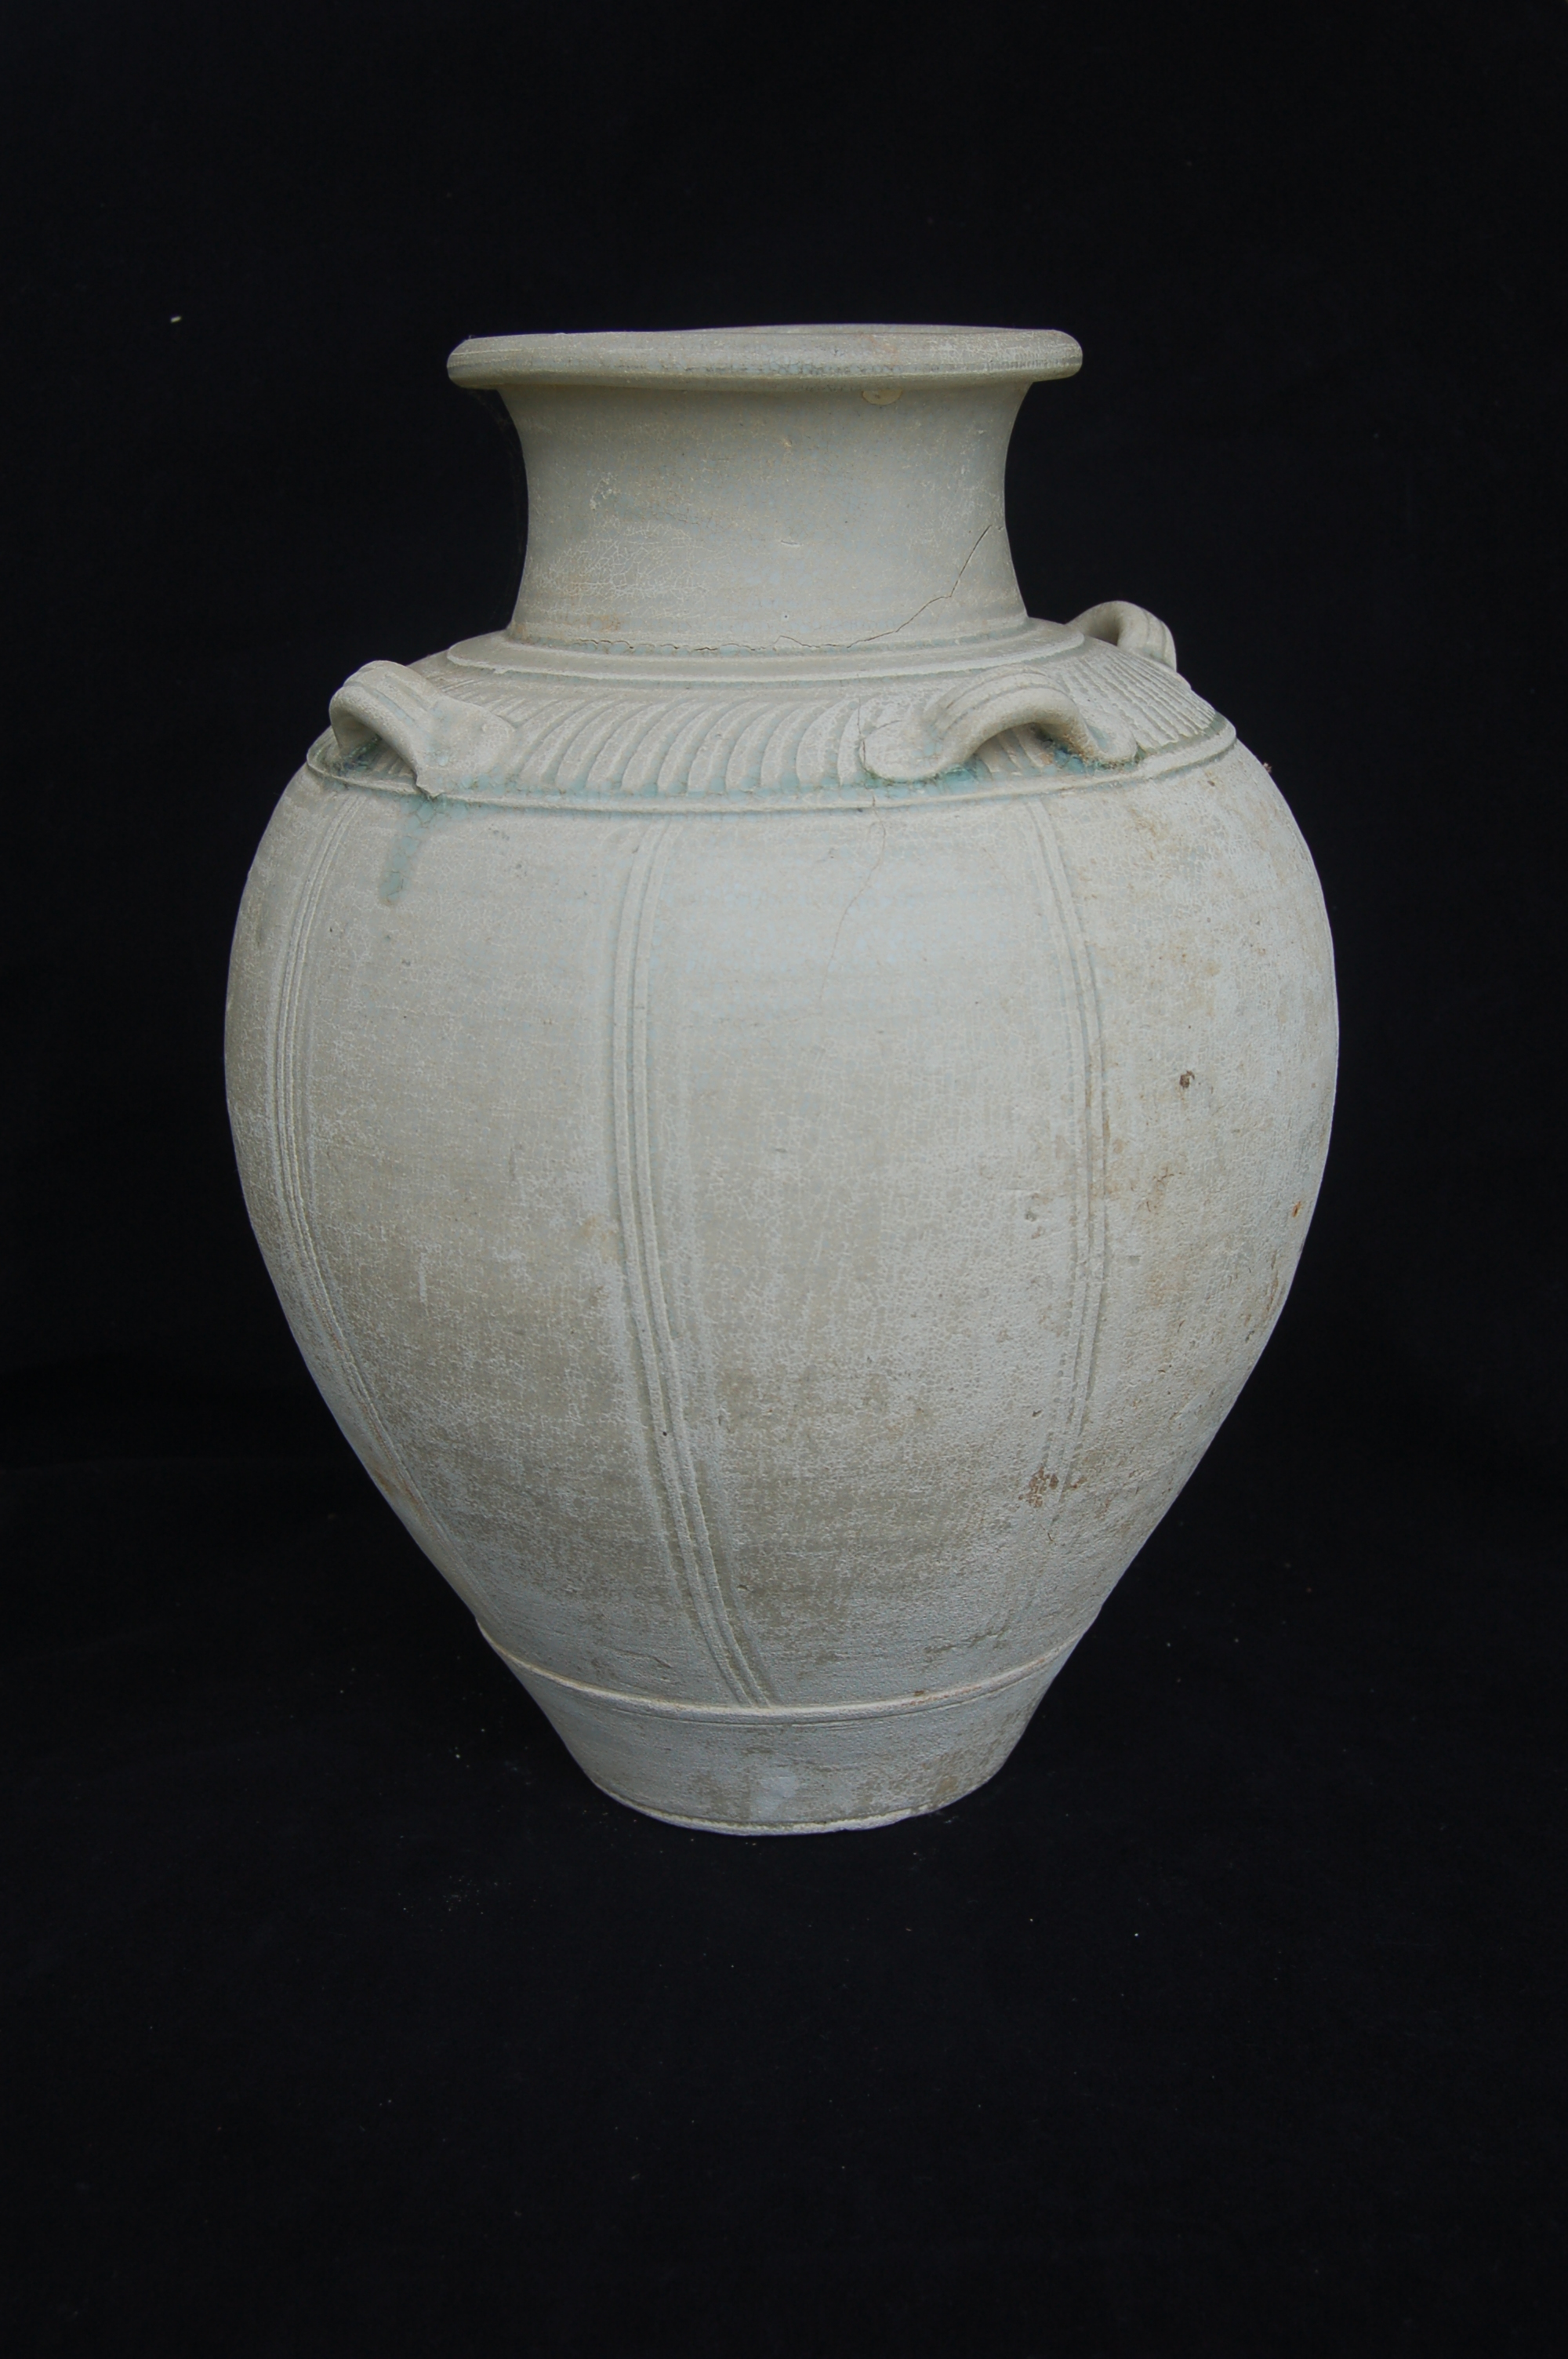 Decorated jar with remnants of <em>qingbai</em> glaze. Gently flared neck with a folded mouth-rim, four lug-handles on the shoulder, and a carved foot-ring. The body is divided into eight panels by duos of combed vertical lines, while the shoulder is circled by elegantly spiralled striations. Diameter 22 cm, height 30 cm.